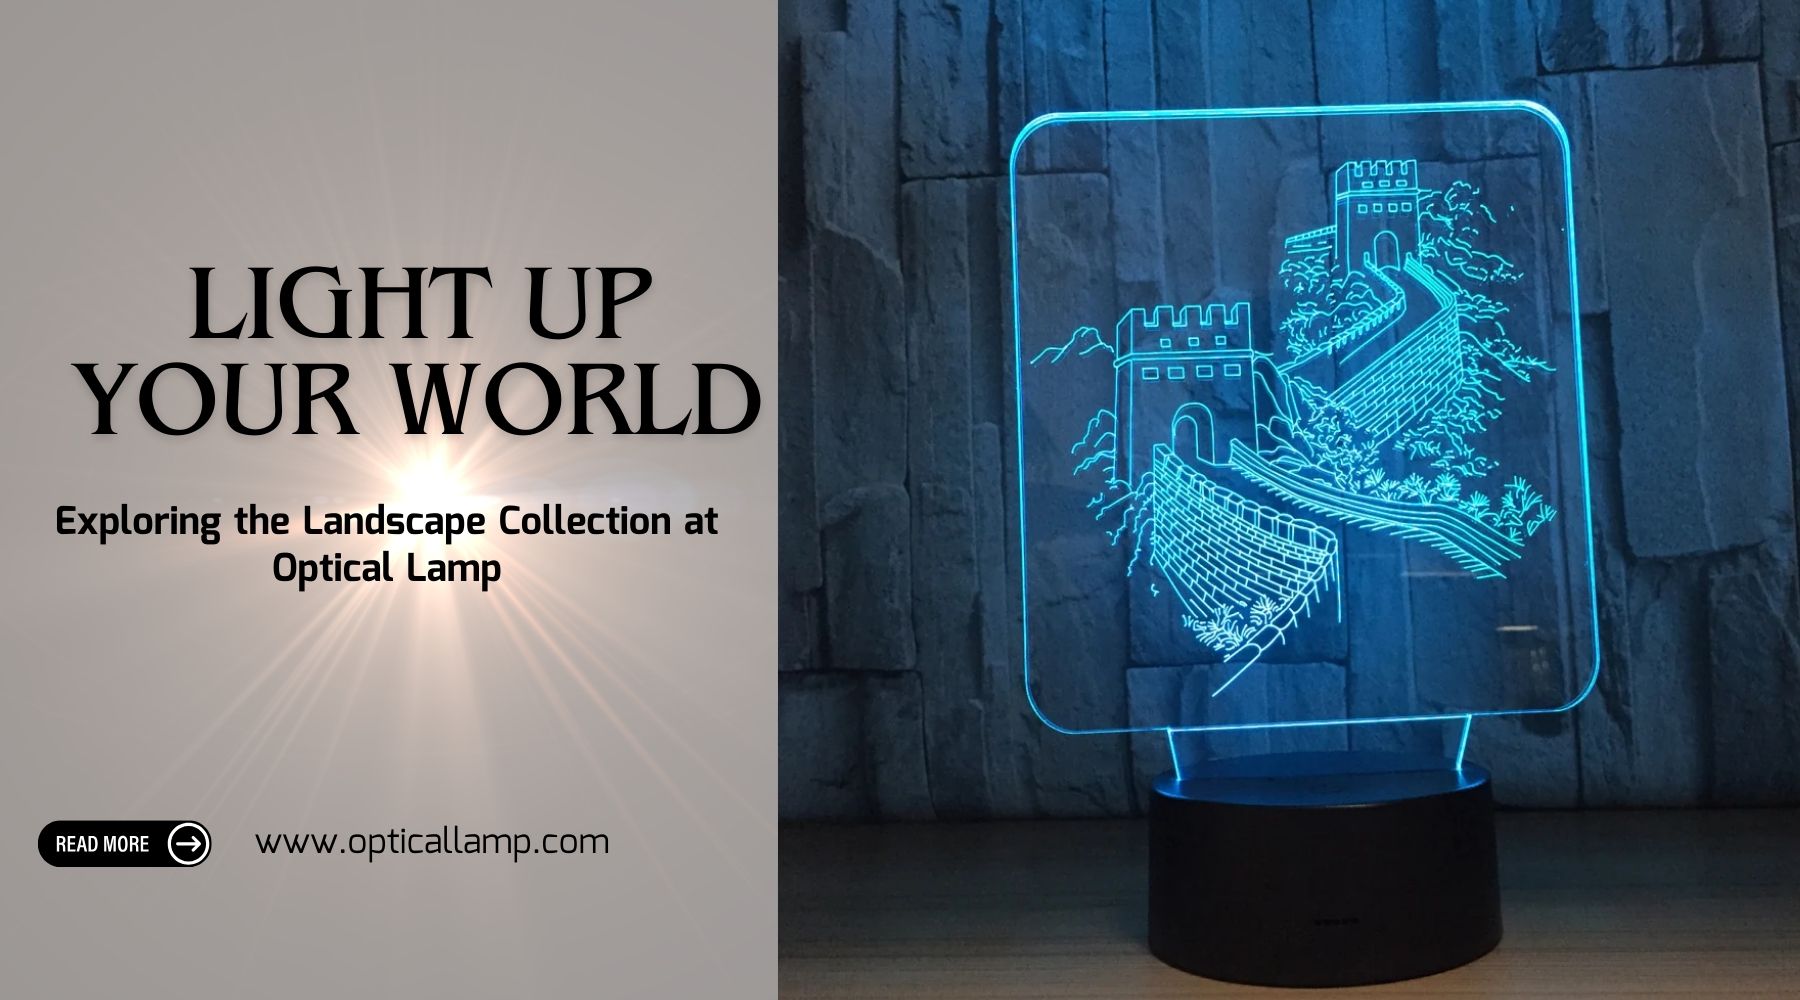 Light Up Your World: Exploring the Landscape Collection at Optical Lamp